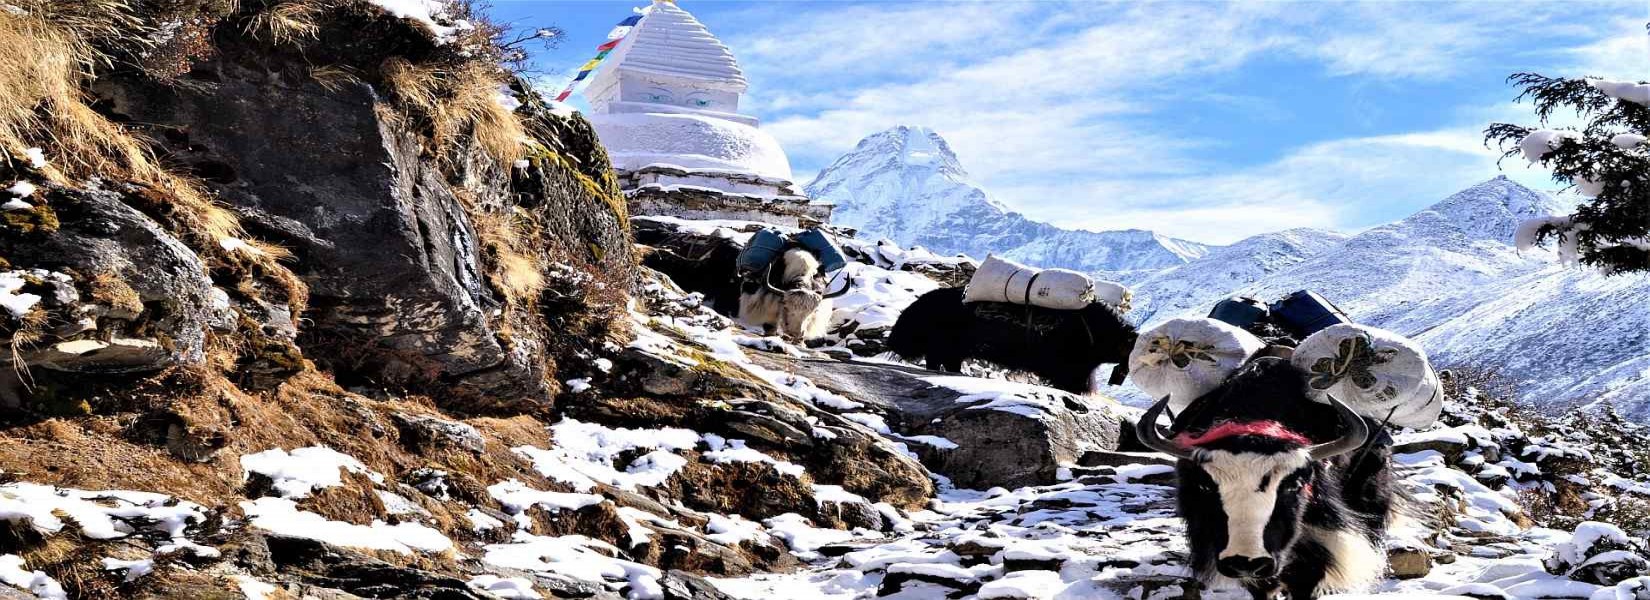 Visit Nepal 2020 Selected Treks And Tour